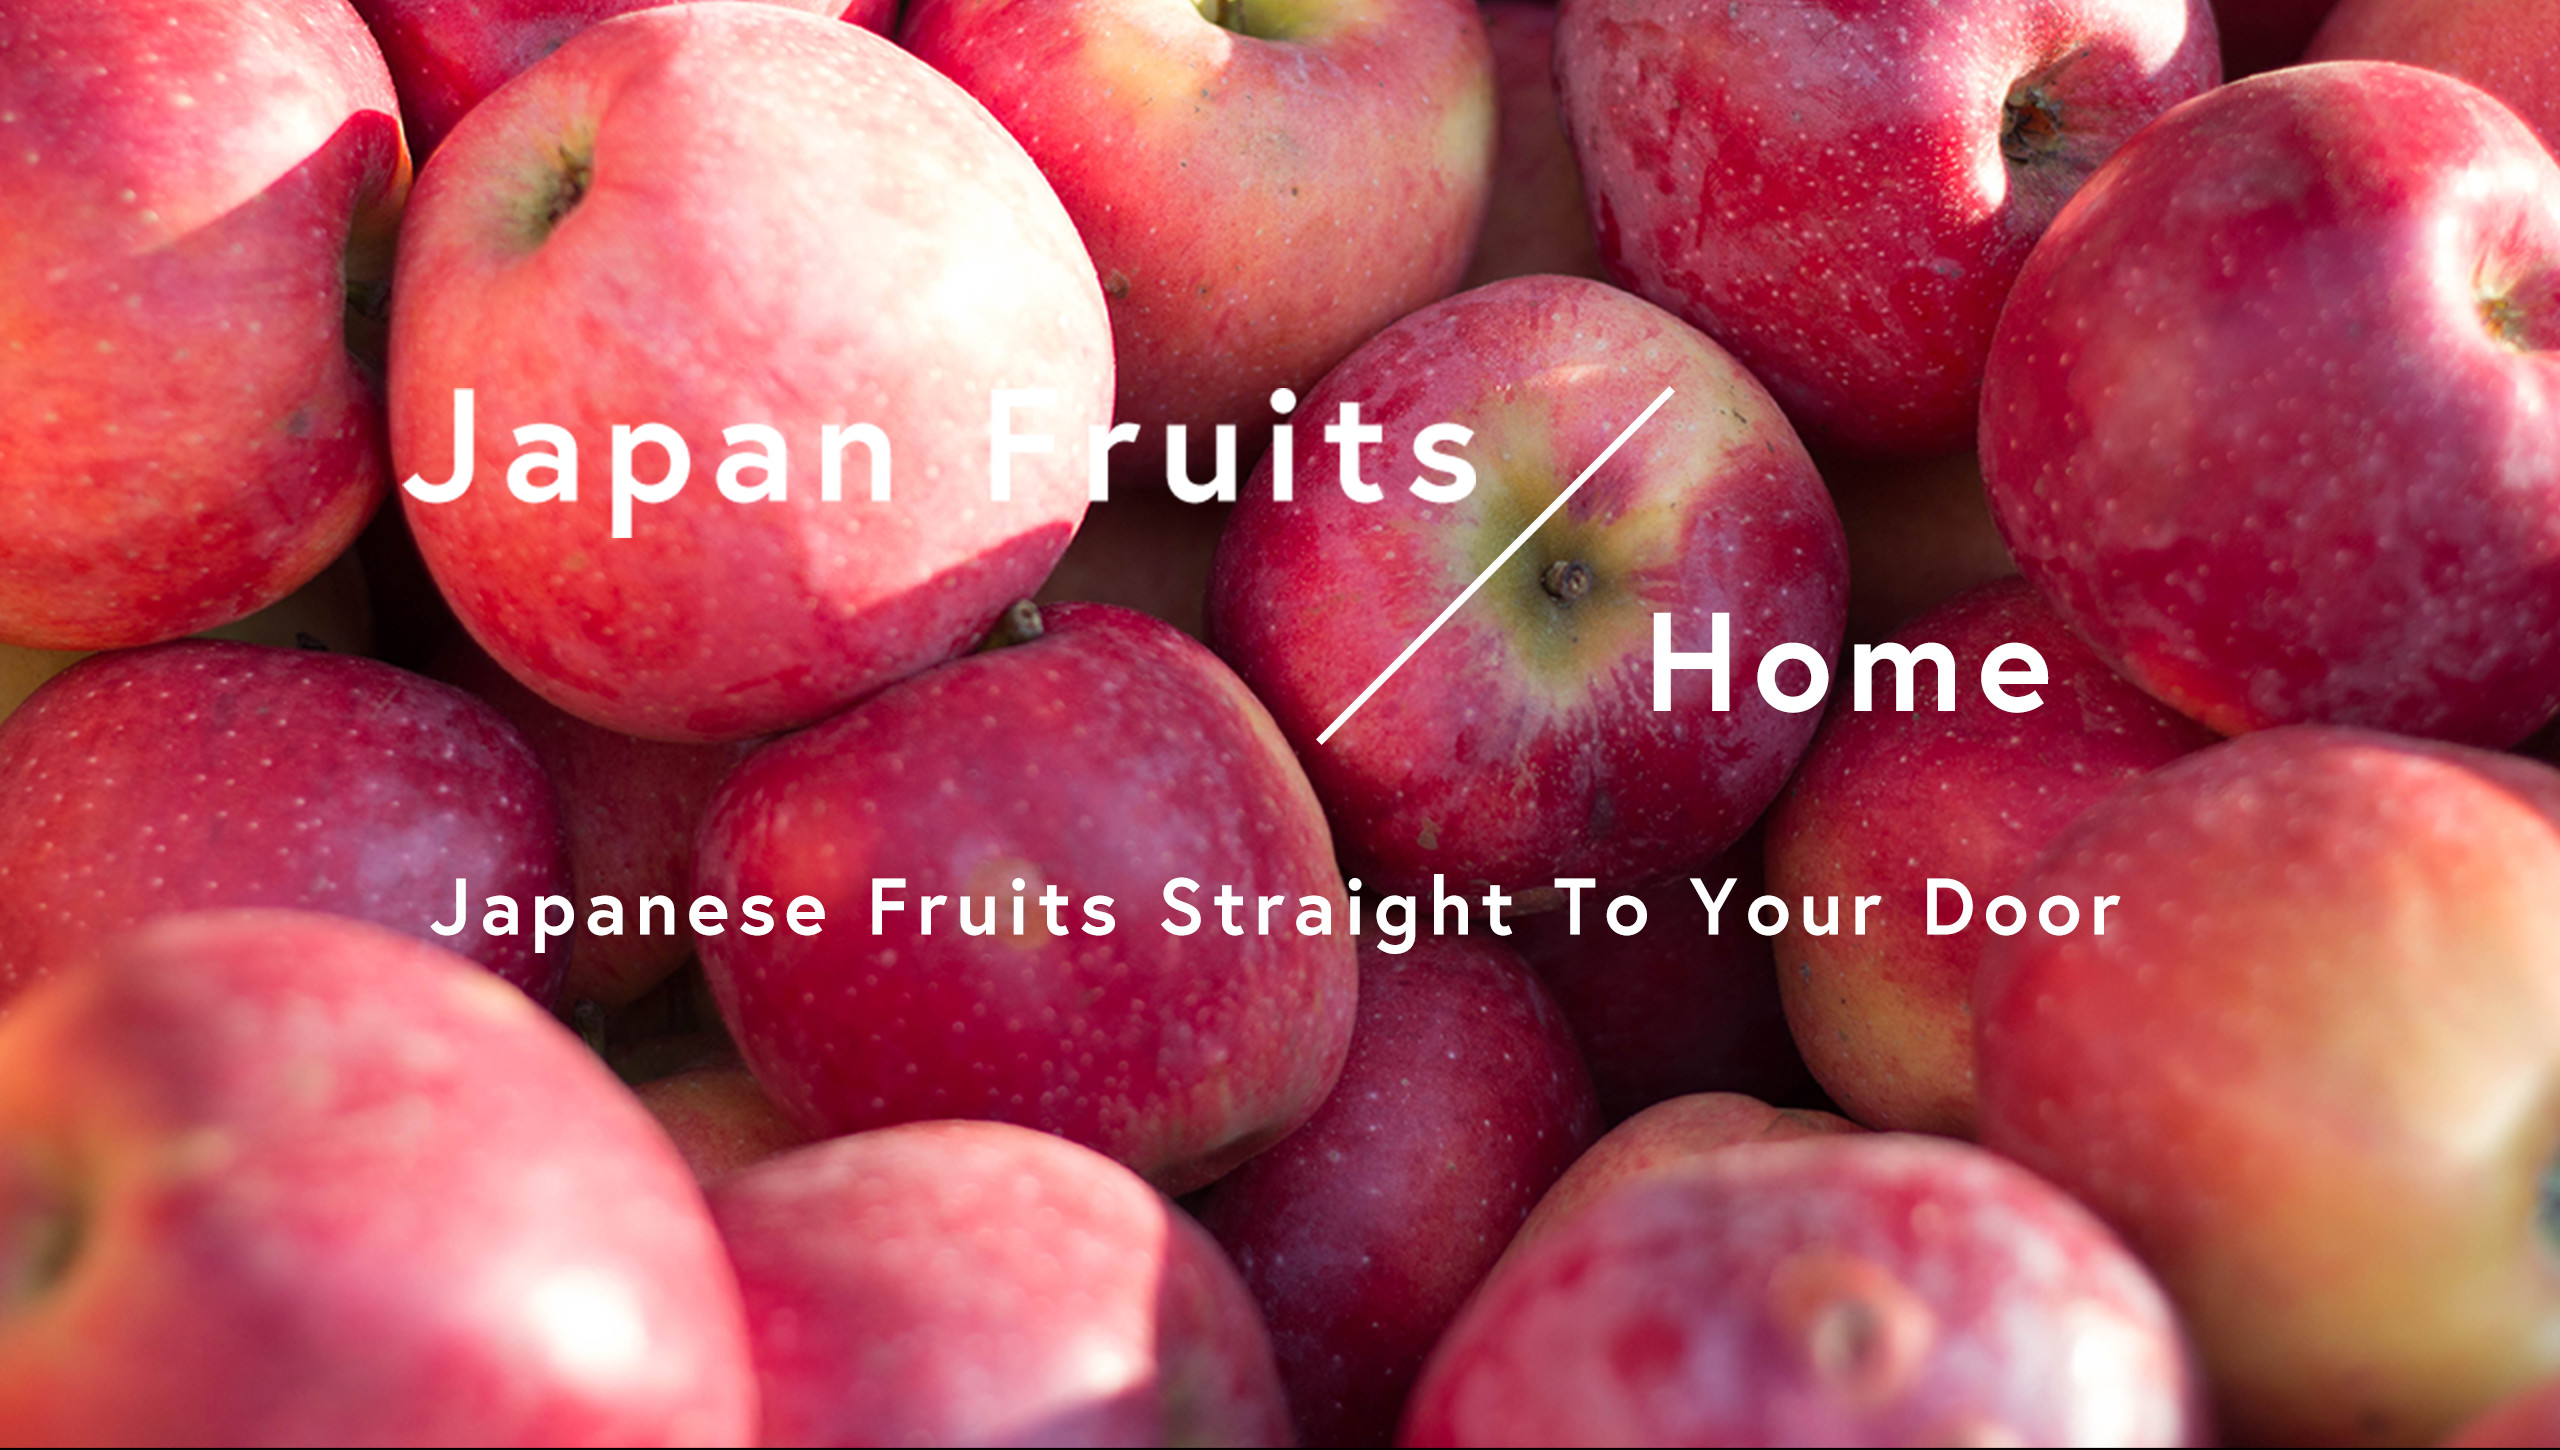 Japanese Fruits Straight To Your Door - Japanese Fruits Straight To Your Door